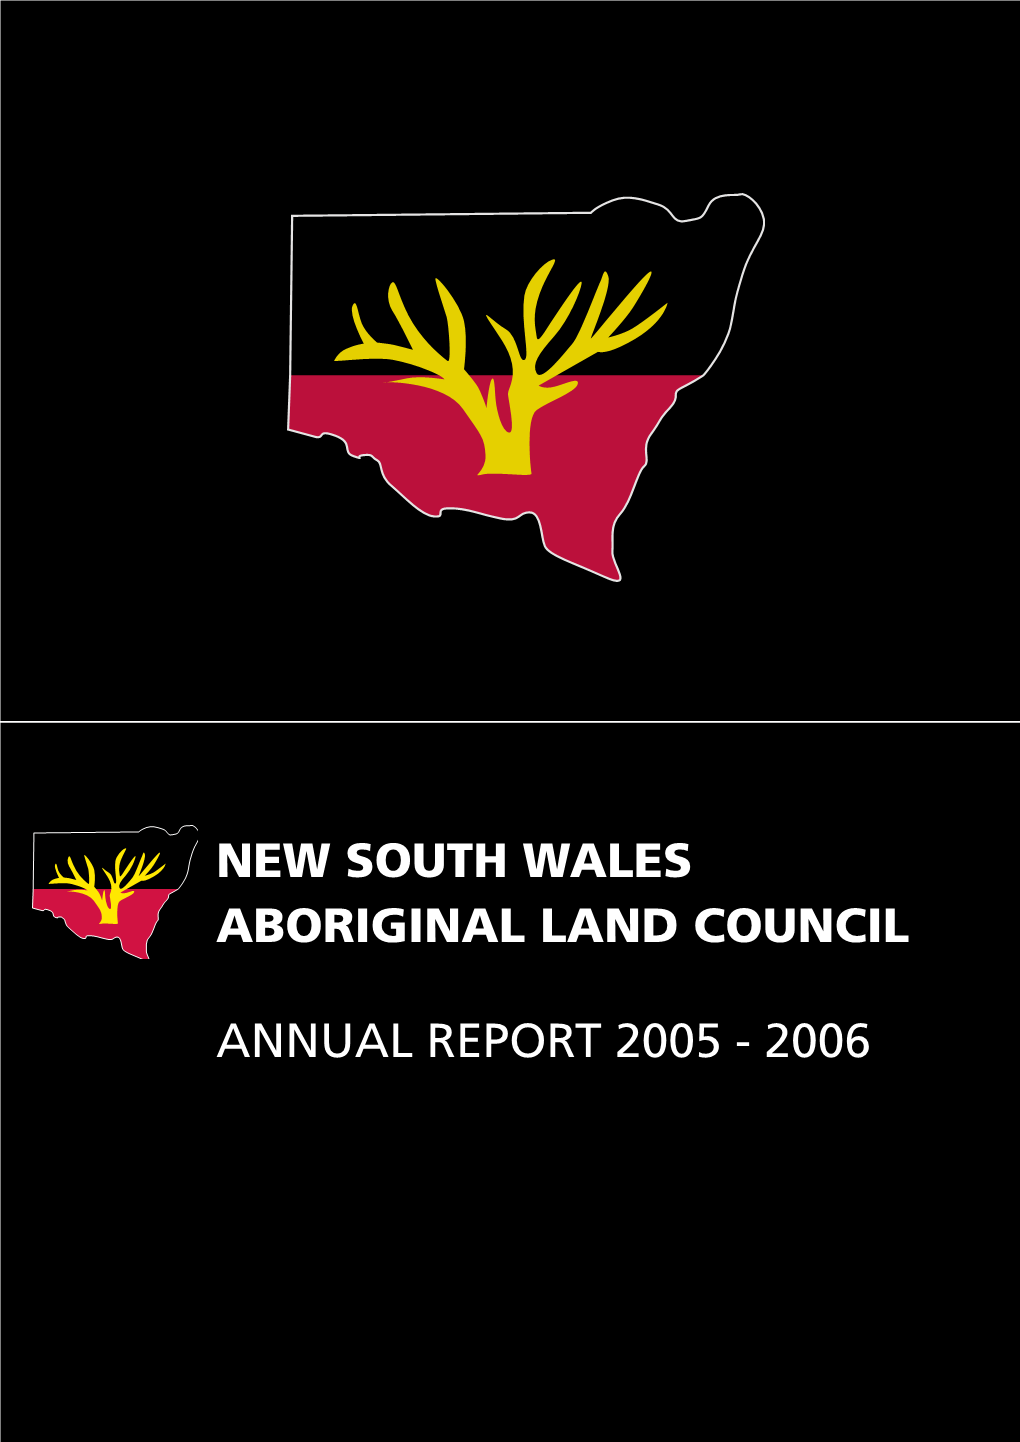 New South Wales Aboriginal Land Council Annual Report 2005